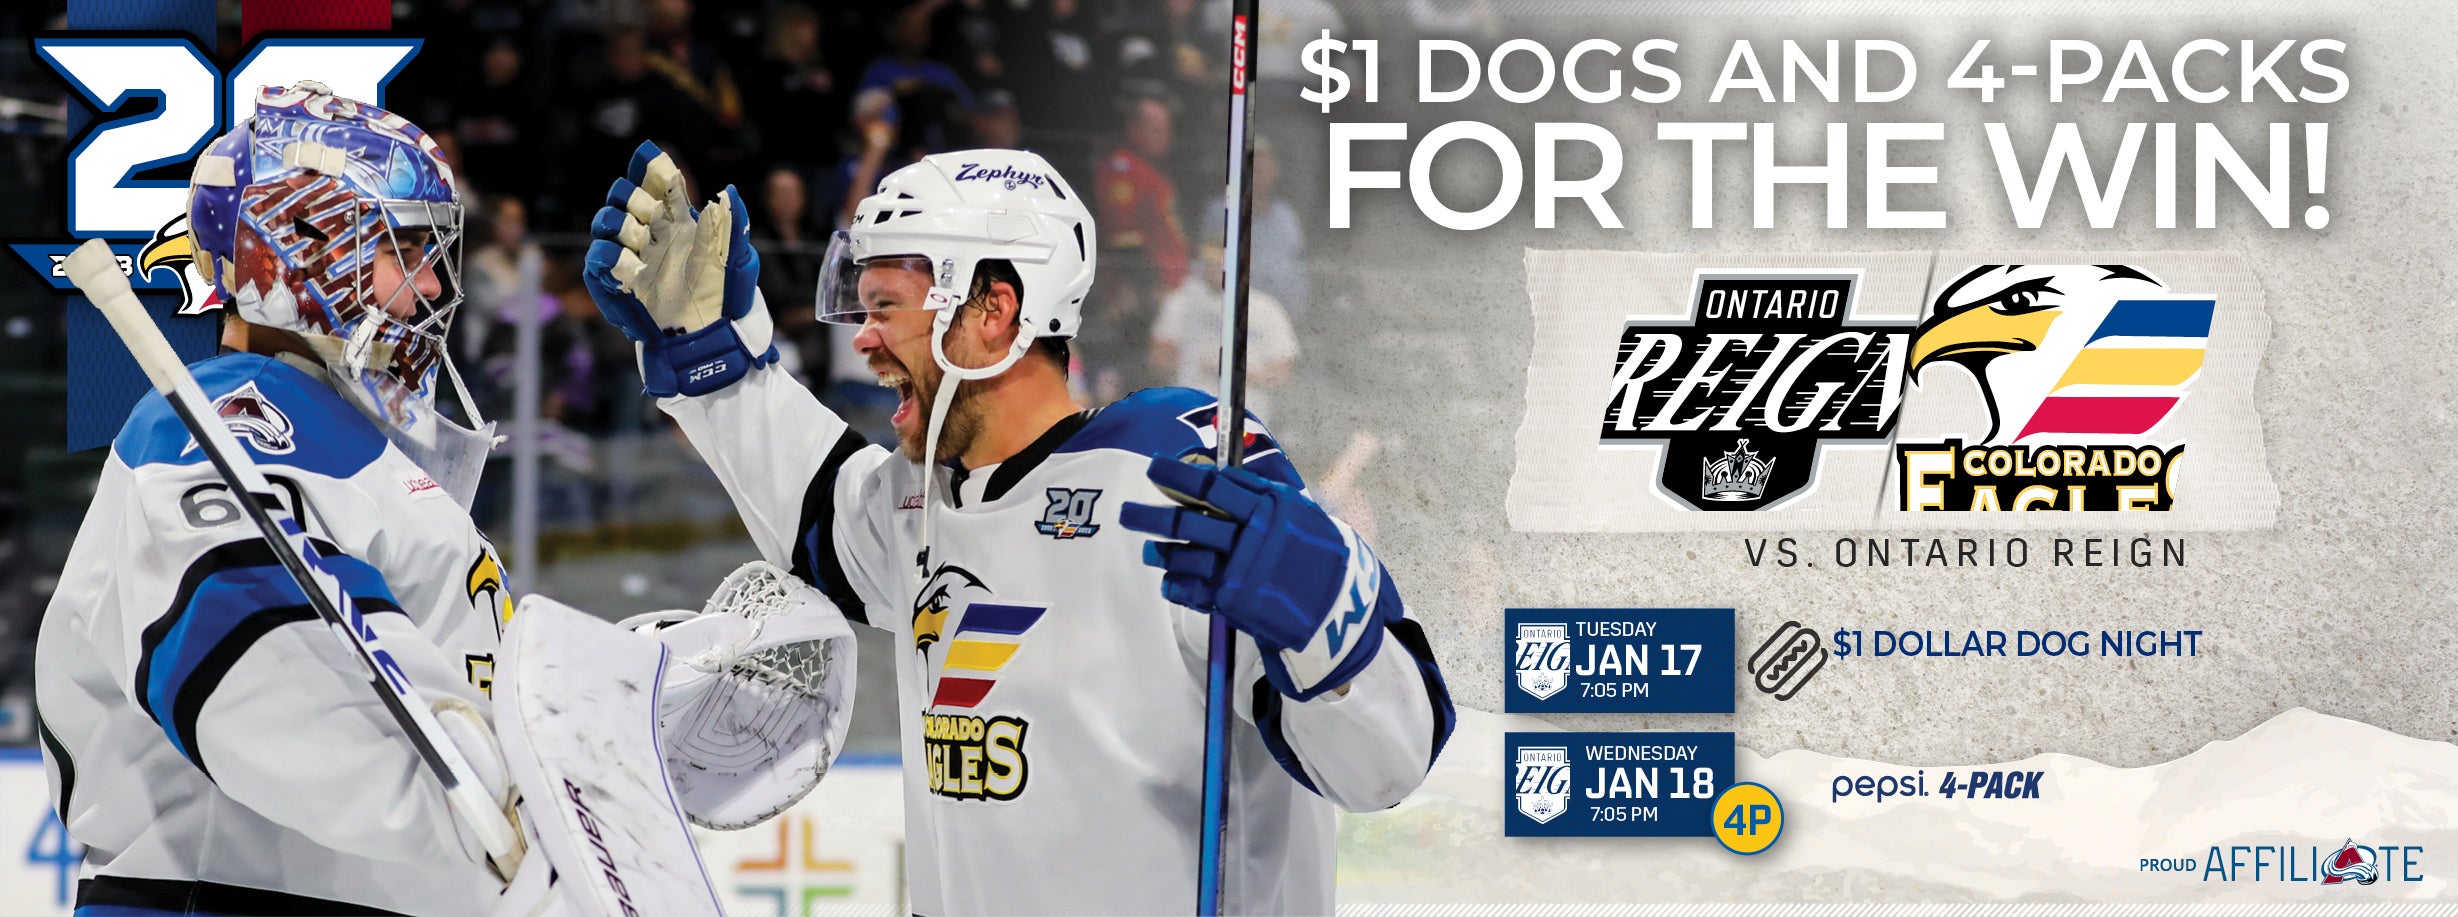 DOLLAR DOGS AND PEPSI FAMILY 4-PACKS FOR THE WIN THIS WEEK!